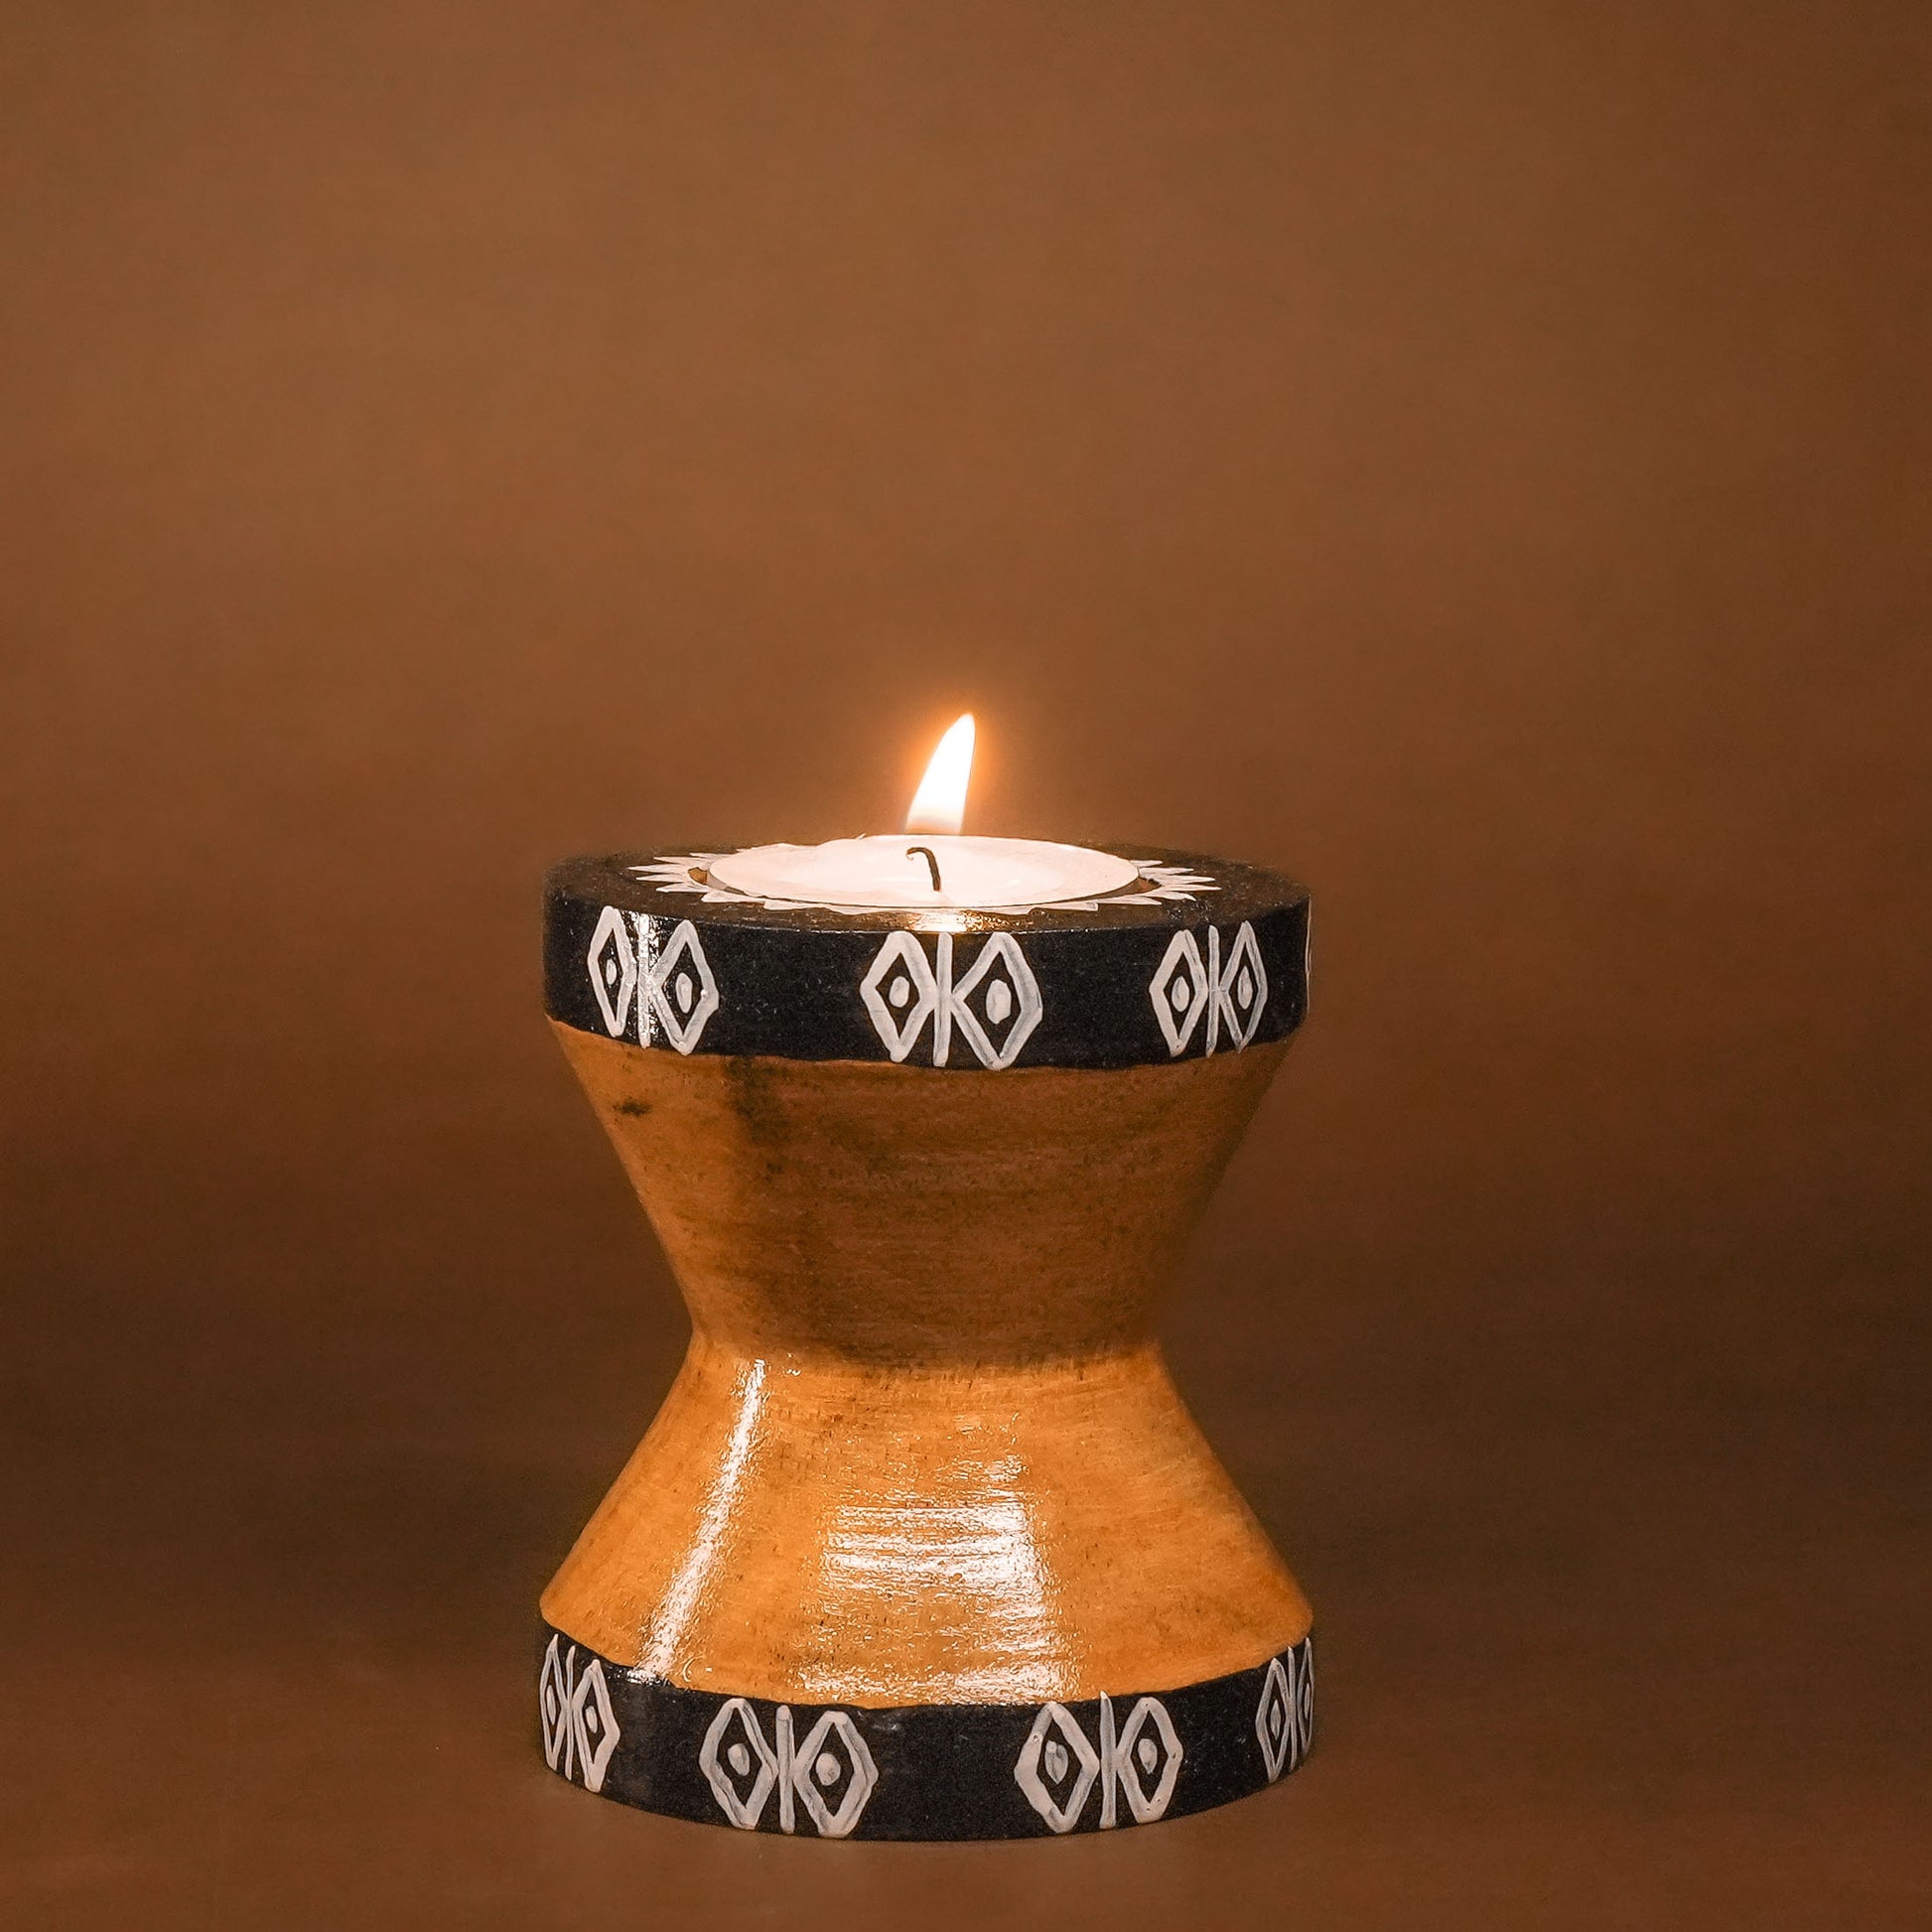 Coshal Arts| Wooden Tealight Holder/ Candle Folder with 1 tealight for Home Decoration Diwali Lighting Gift Christmas | 1 Piece |D11 - Coshal 1